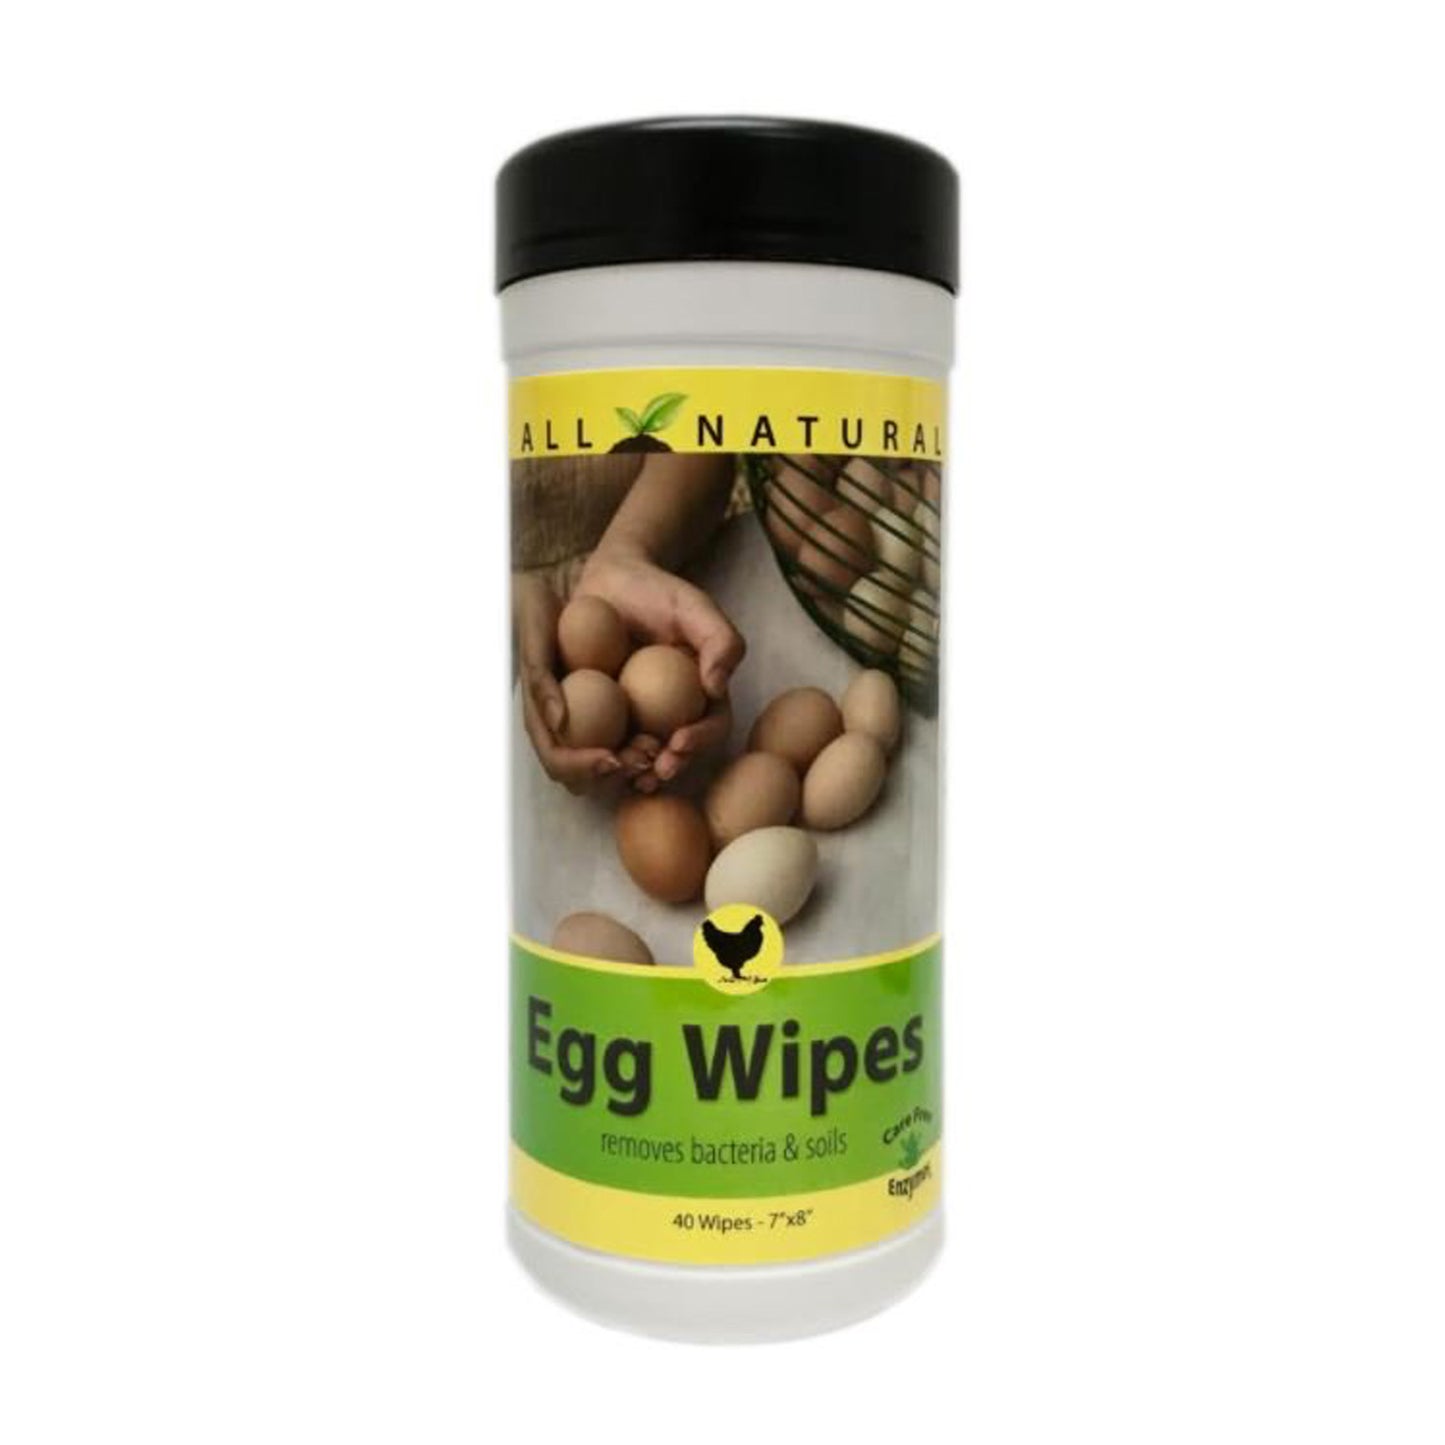 All Natural Egg Wipes